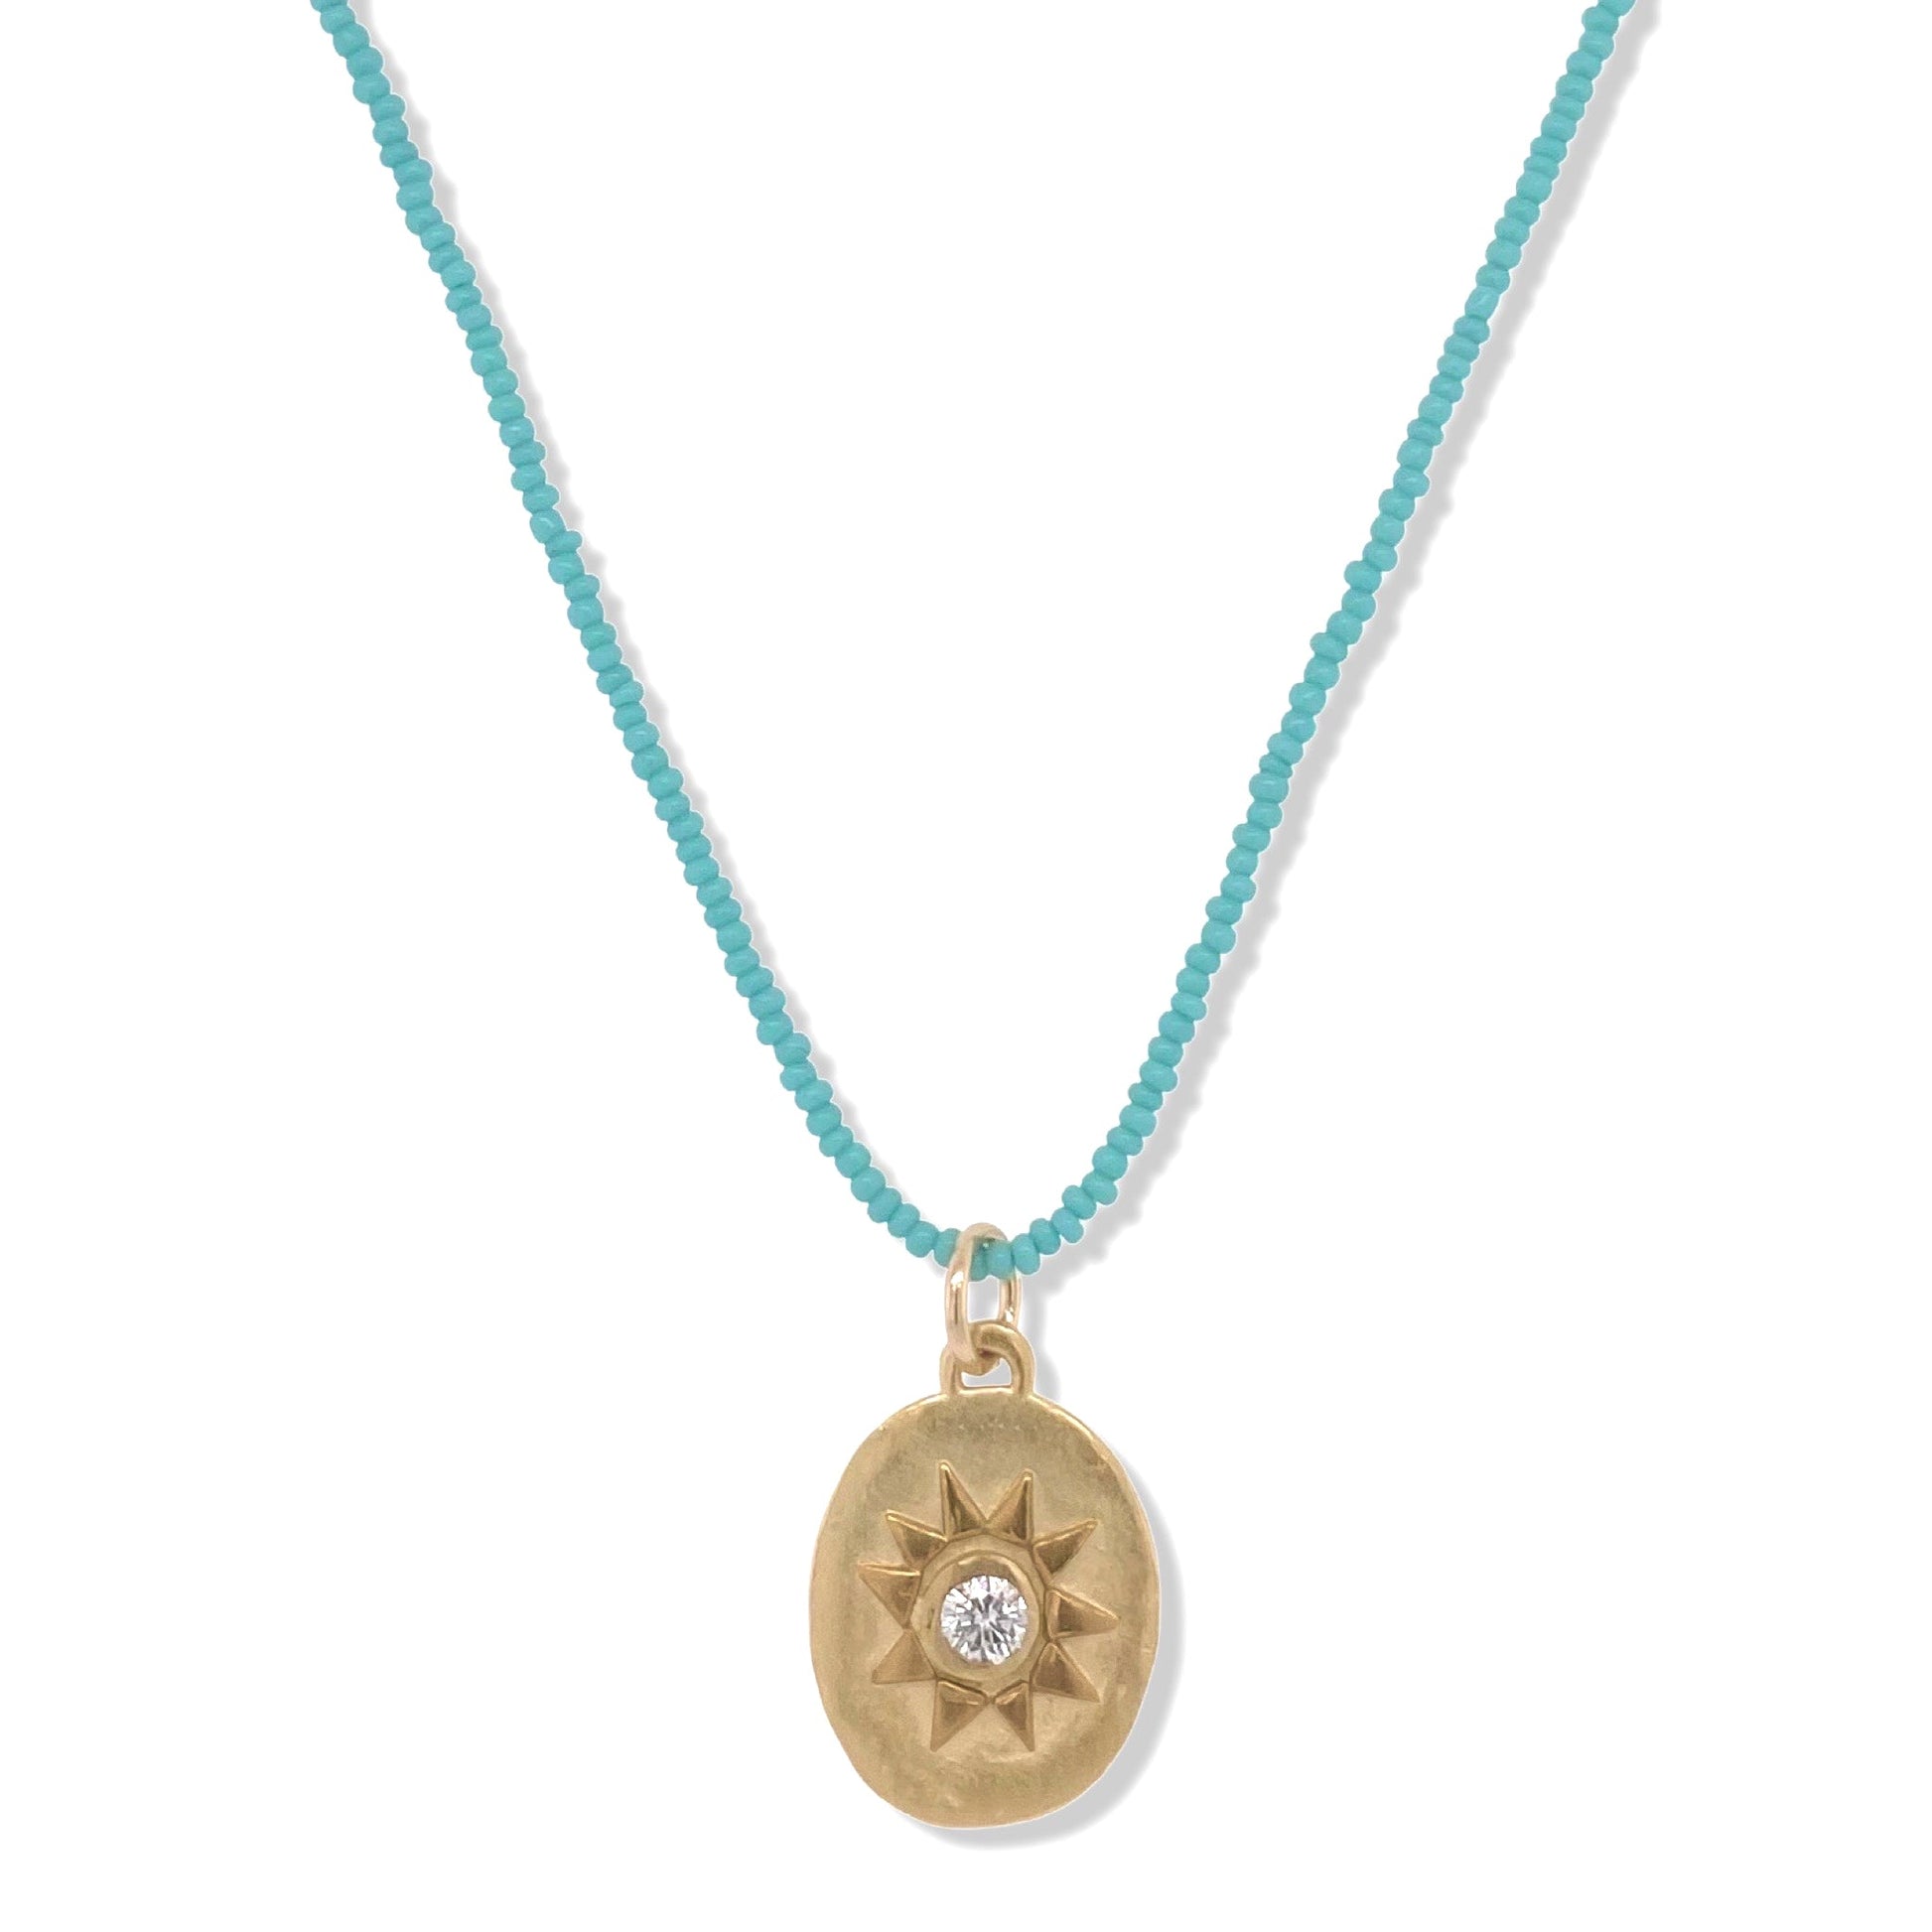 Selena Necklace in Gold on Turquoise beads | Nalu | Nantucket